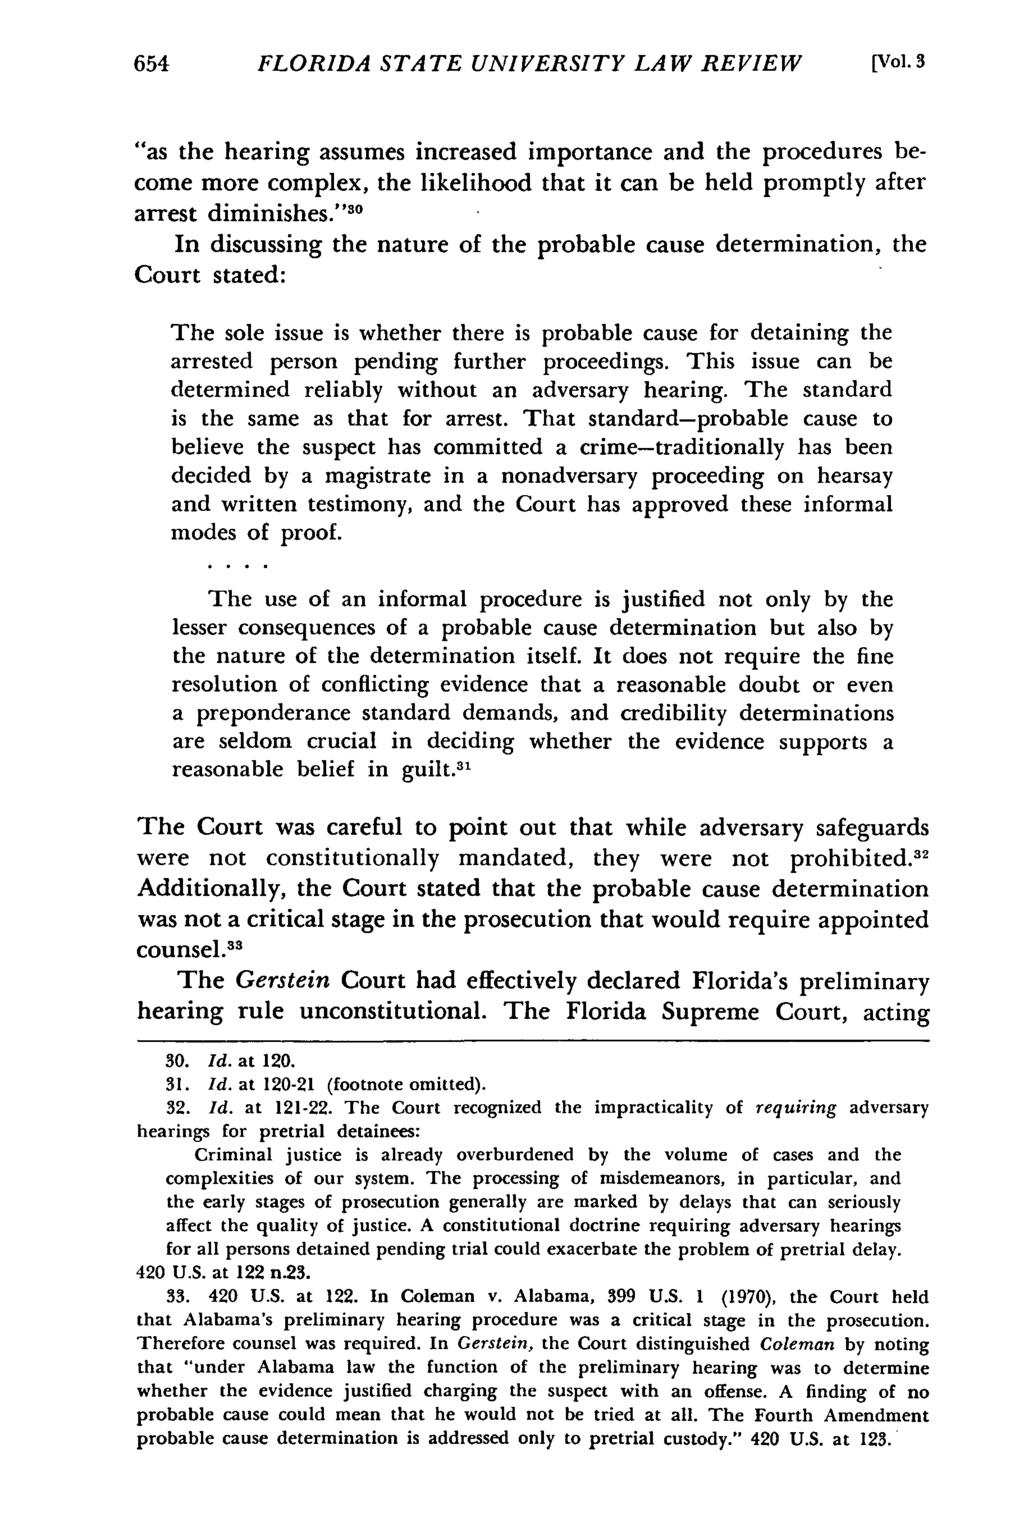 FLORIDA STATE UNIVERSITY LAW REVIEW [Vol. 3 "as the hearing assumes increased importance and the procedures become more complex, the likelihood that it can be held promptly after arrest diminishes.